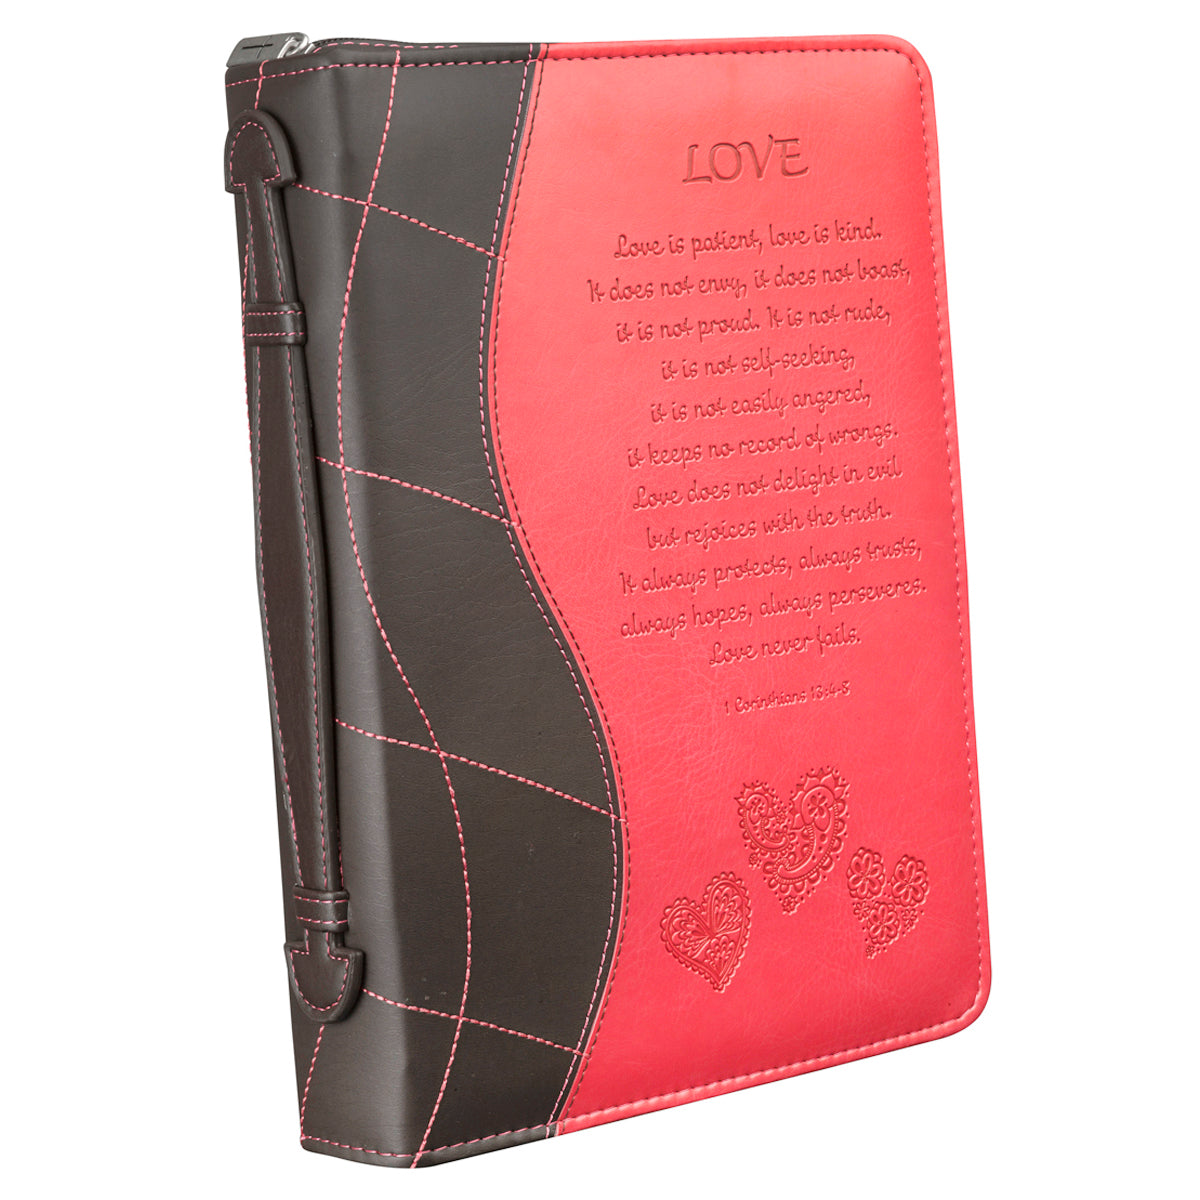 Love Pink Faux Leather Bible Cover - 1 Corinthians 13:4-8 - The Christian Gift Company